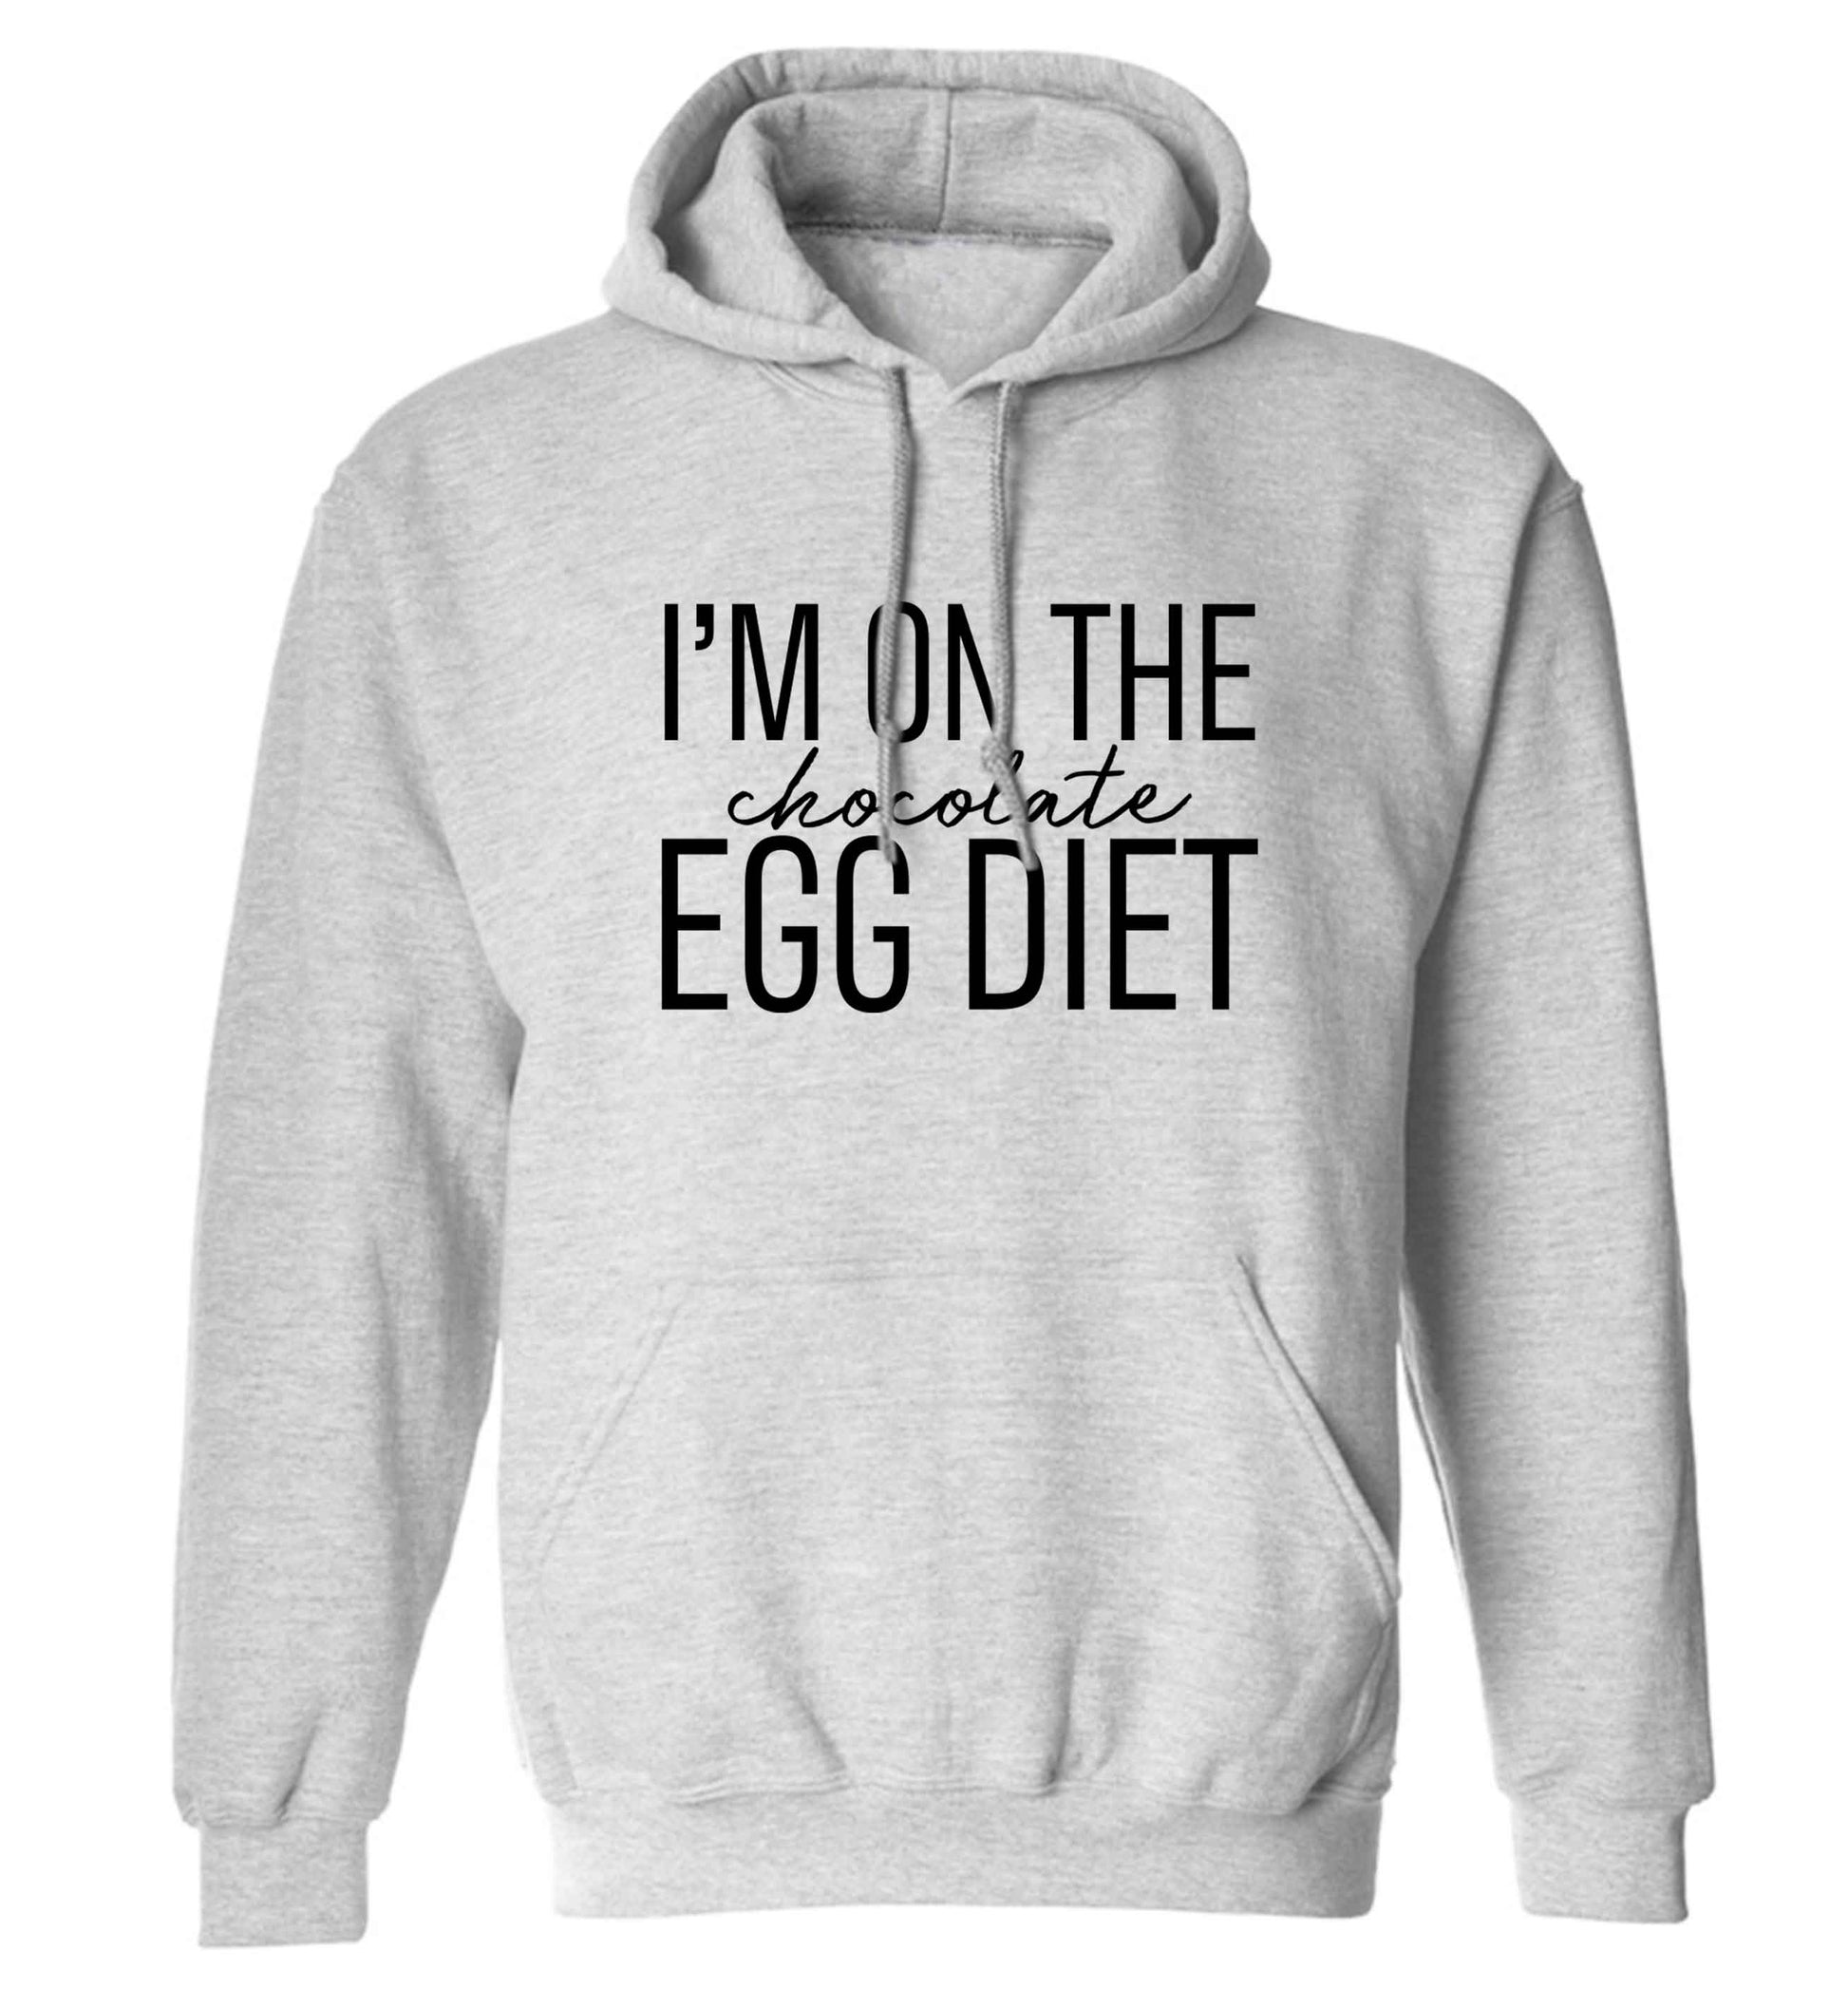 I'm on the chocolate egg diet adults unisex grey hoodie 2XL